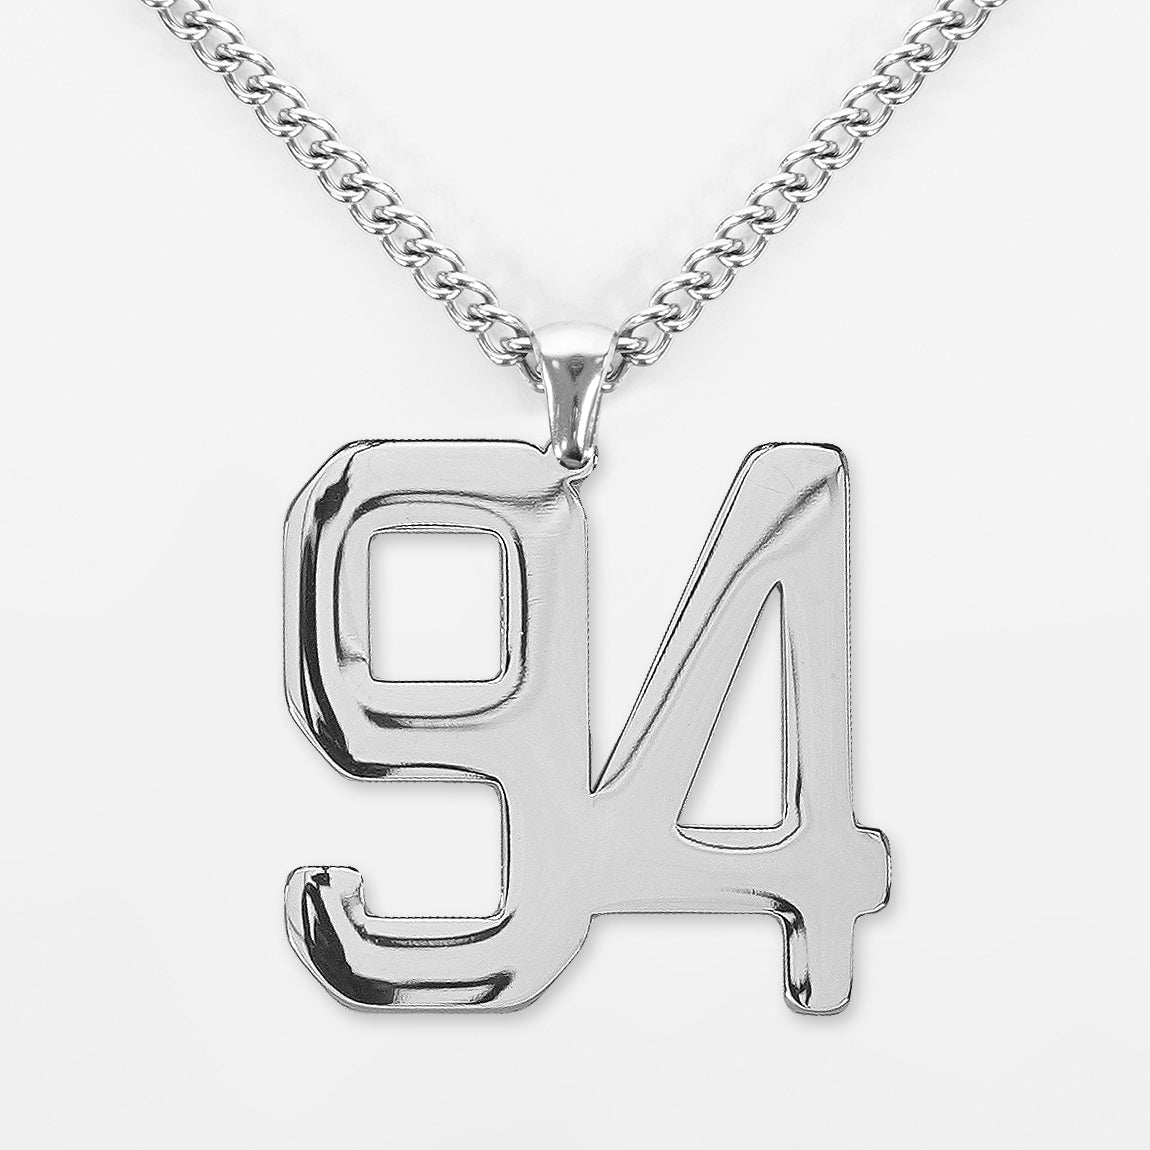 94 Number Pendant with Chain Kids Necklace - Stainless Steel